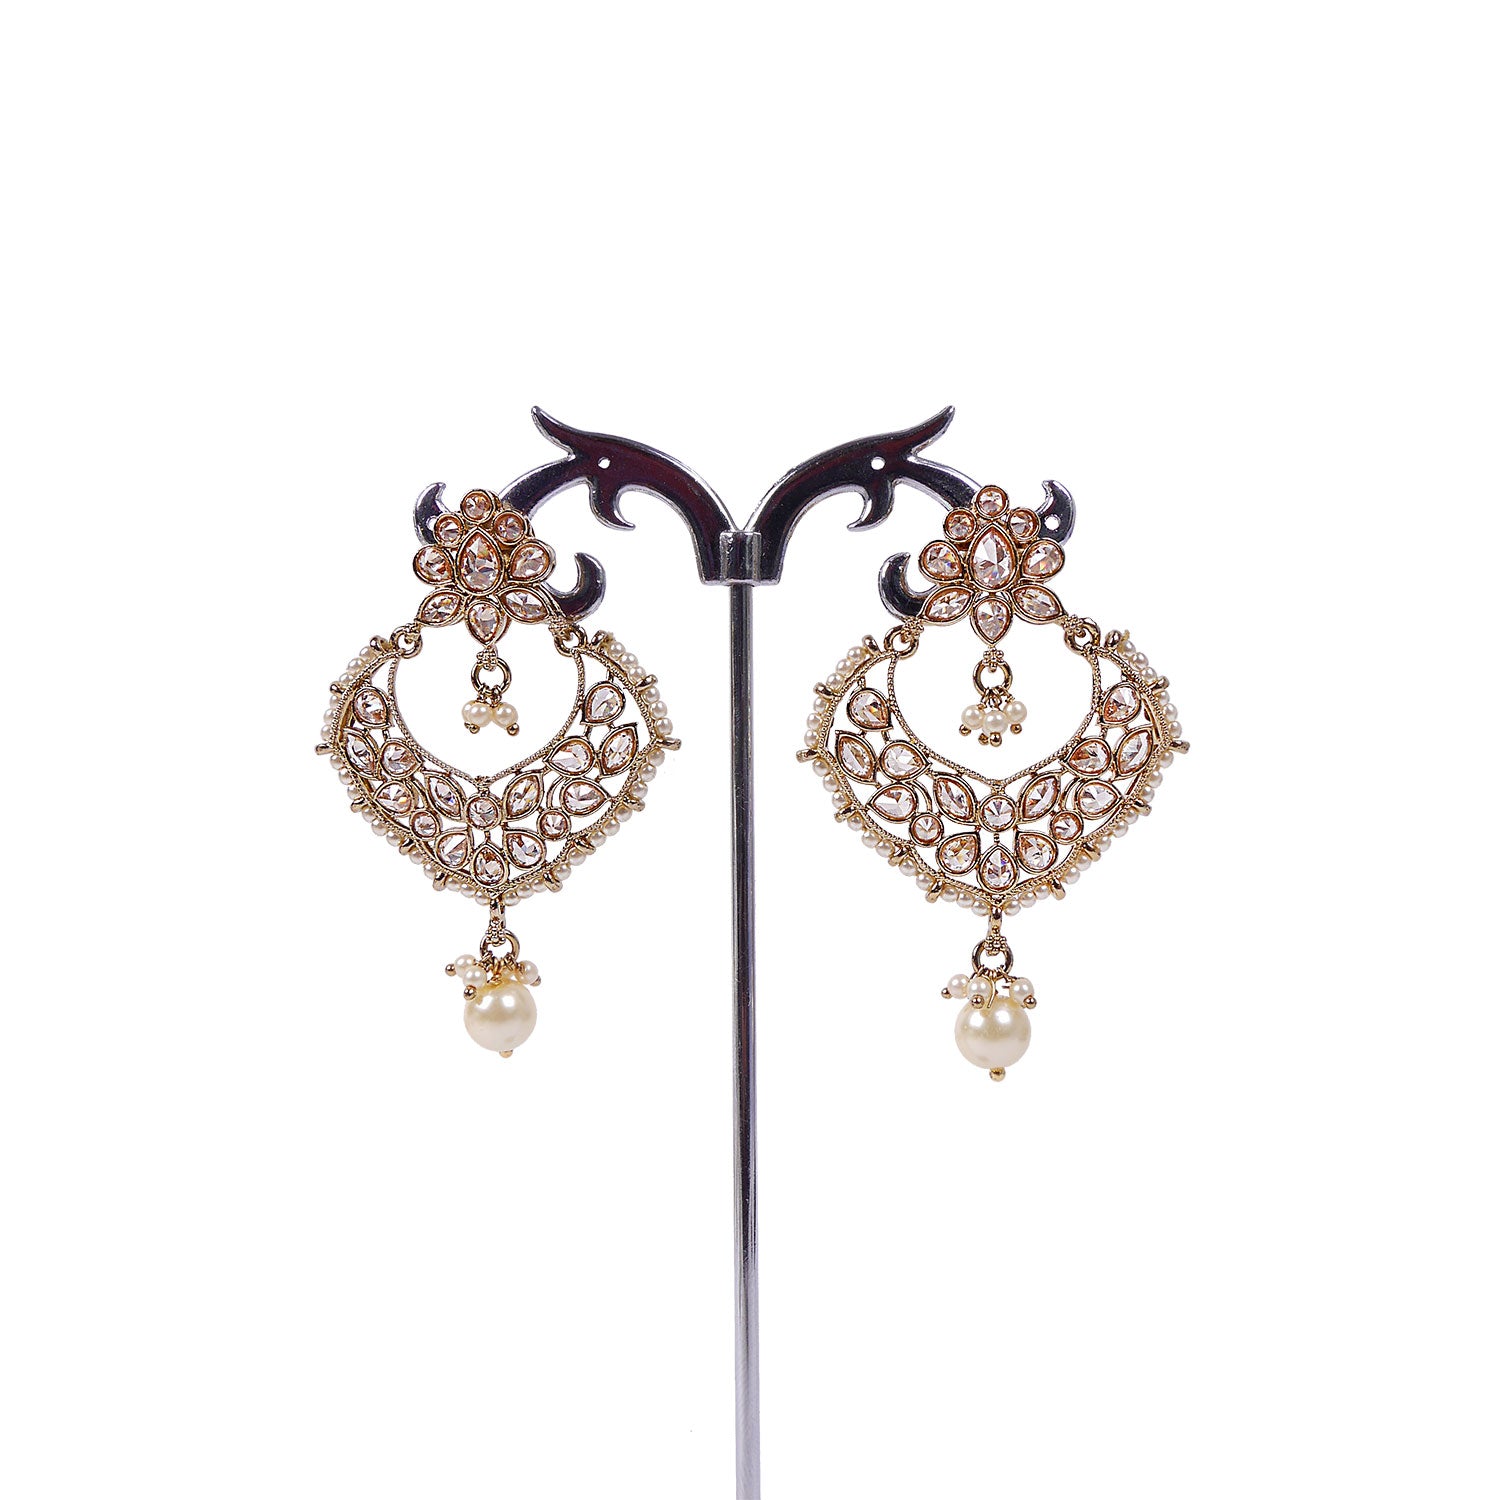 Navika Chandbali Earrings in Pearl and Antique Gold